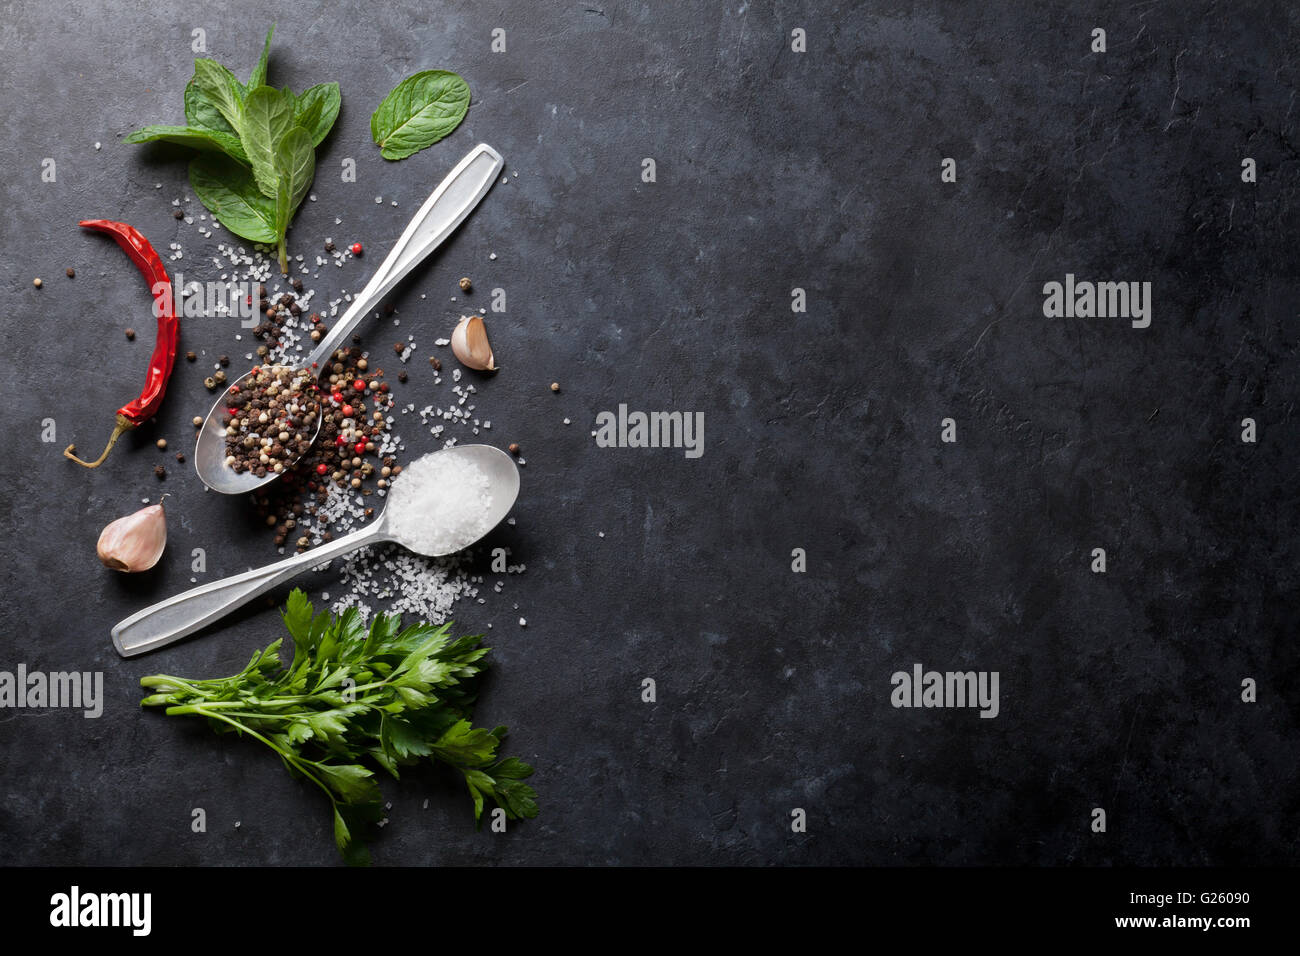 Black, white and red pepper and salt spices in spoon. Mint and parsley herbs. Top view with copy space Stock Photo